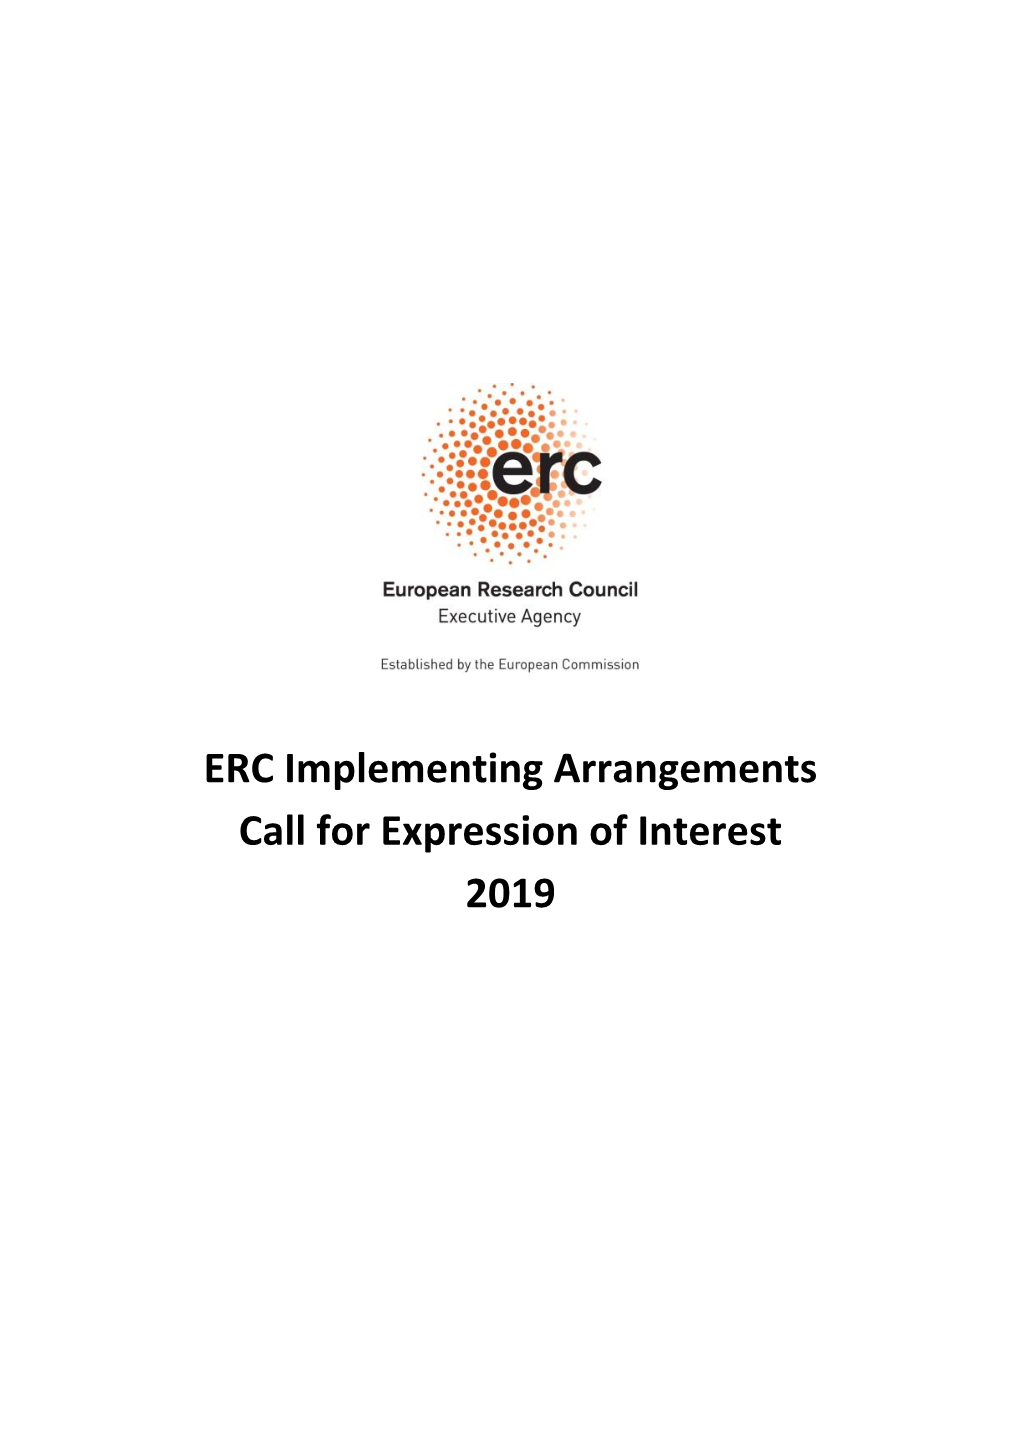 ERC Implementing Arrangements Call for Expression of Interest 2019